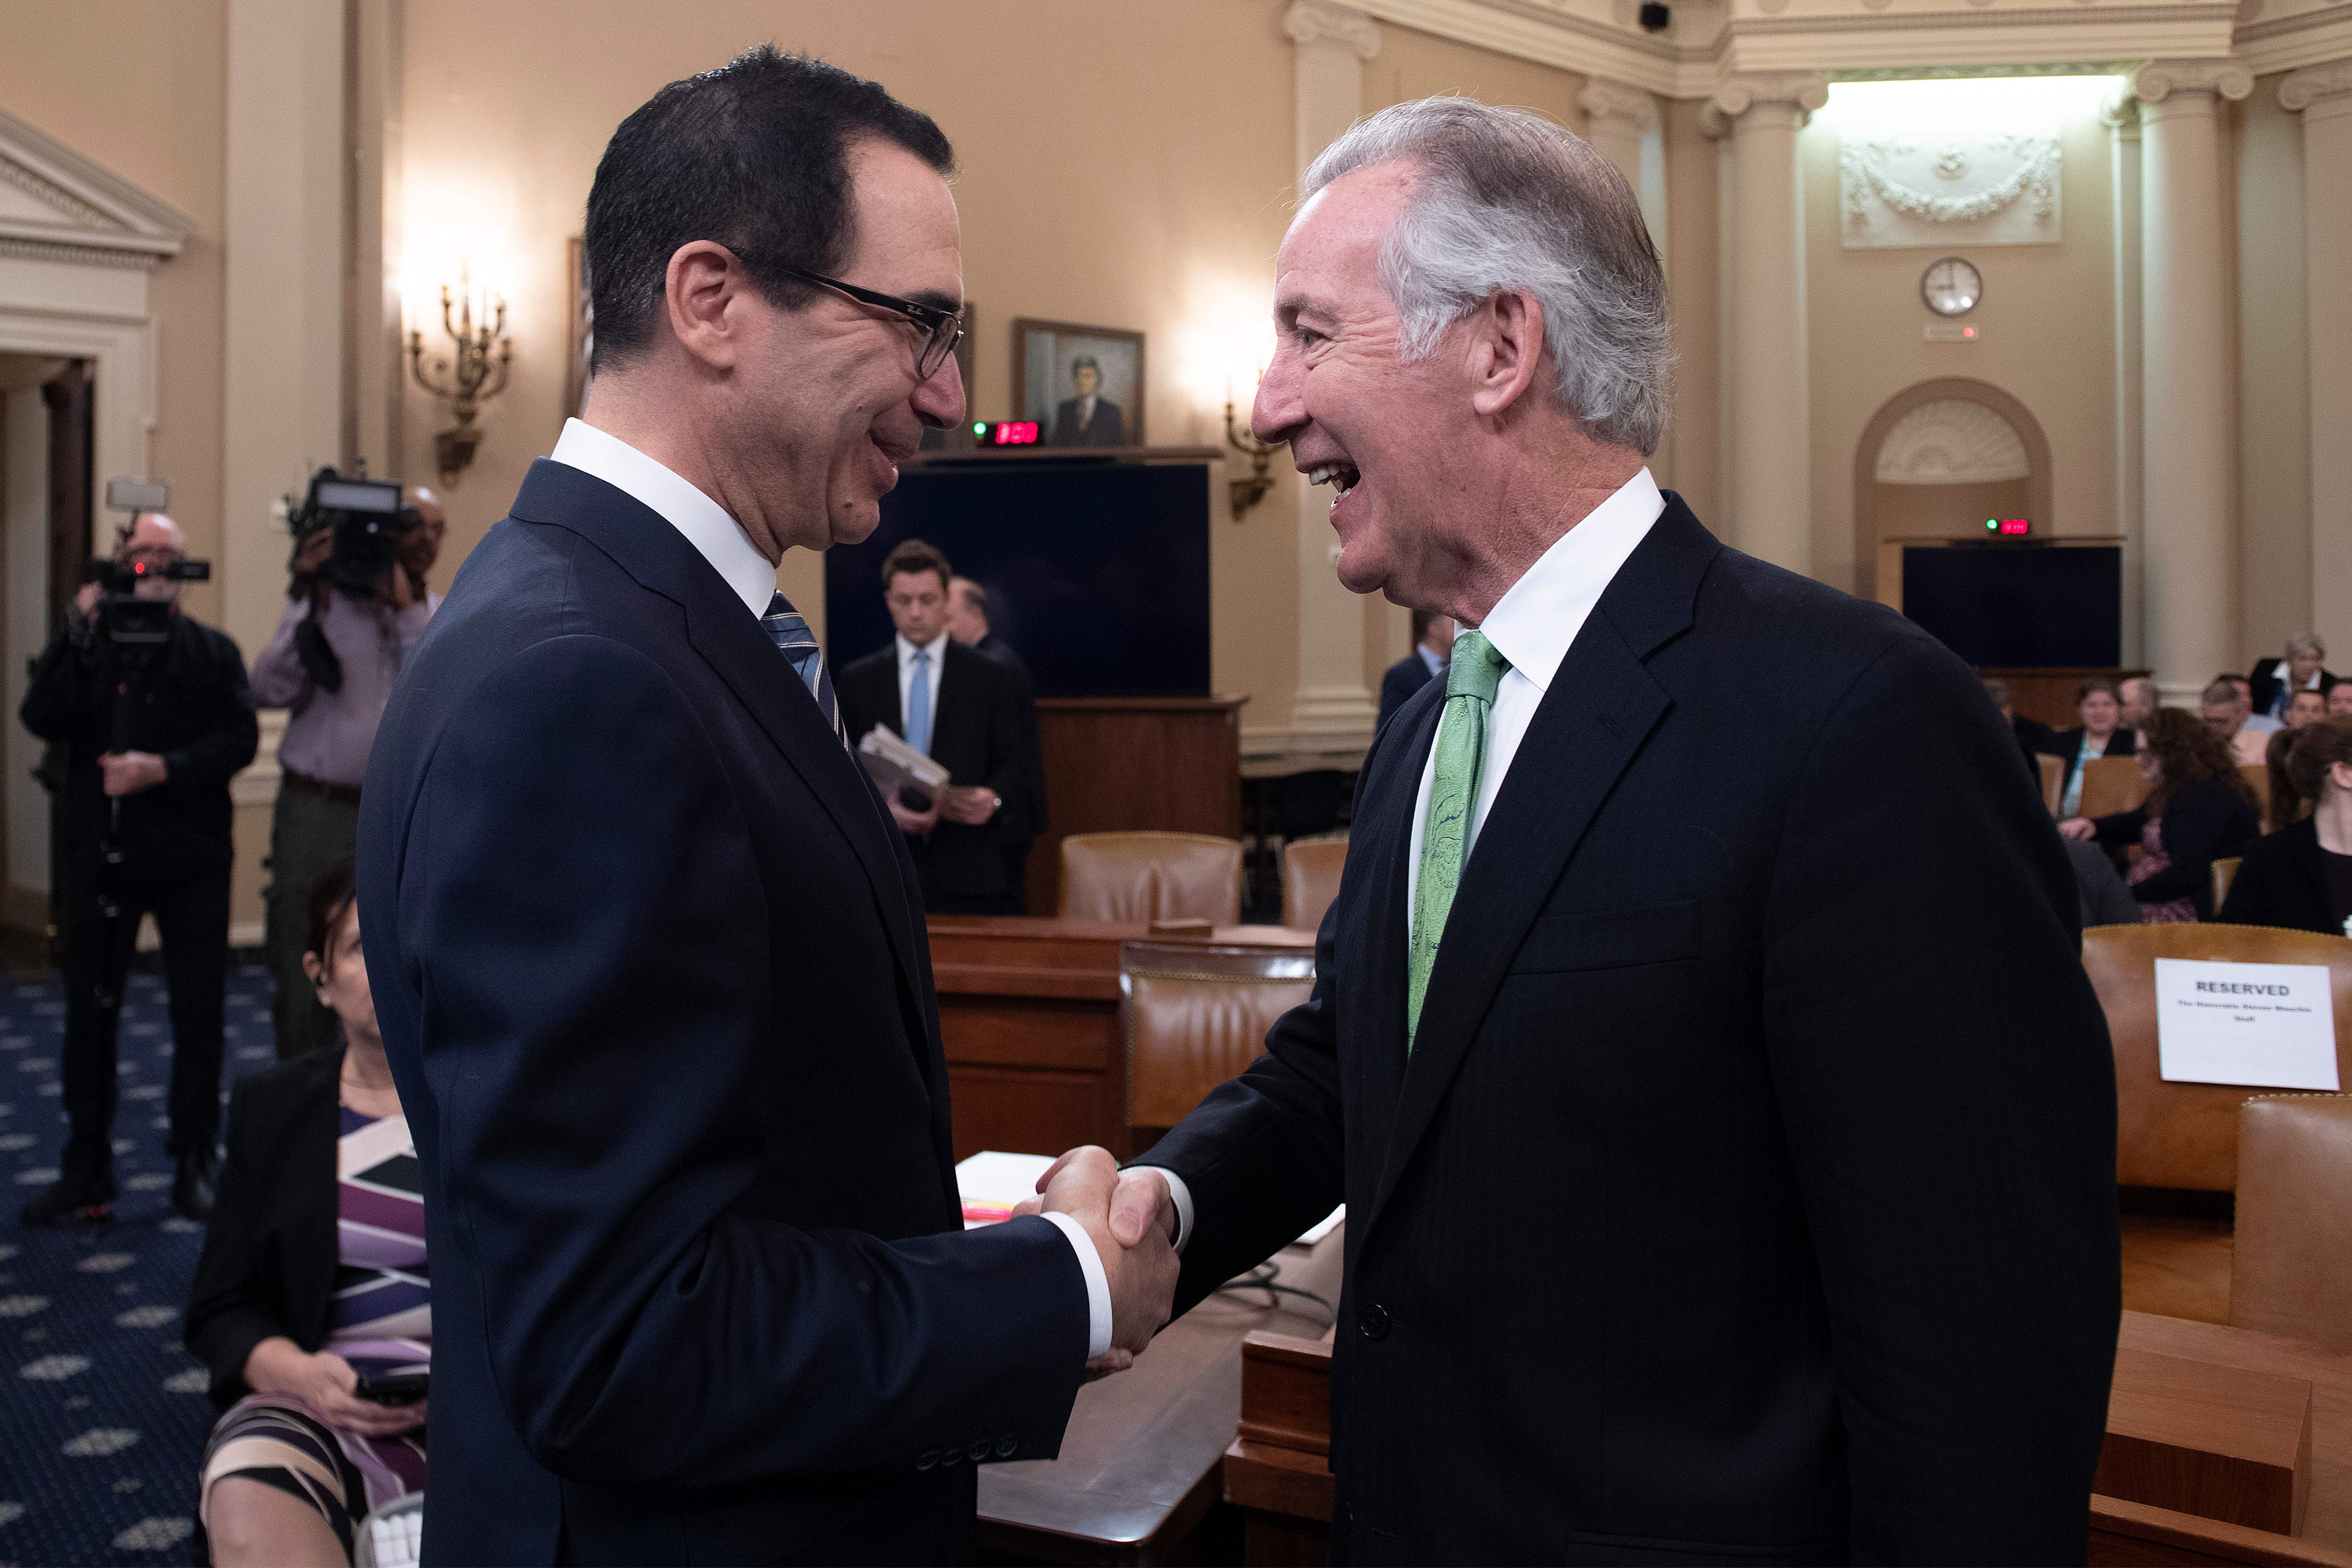 US Treasury Secretary Steven Mnuchin (L) shakes hands with Chairman of the House Ways and Means Committee, Richard Neal, prior to testifying on "The President's FY2020 Budget Proposal" before the House Ways and Means Committee on Capitol Hill in Washington, DC, on March 14, 2019. (JIM WATSON/AFP/Getty Images)